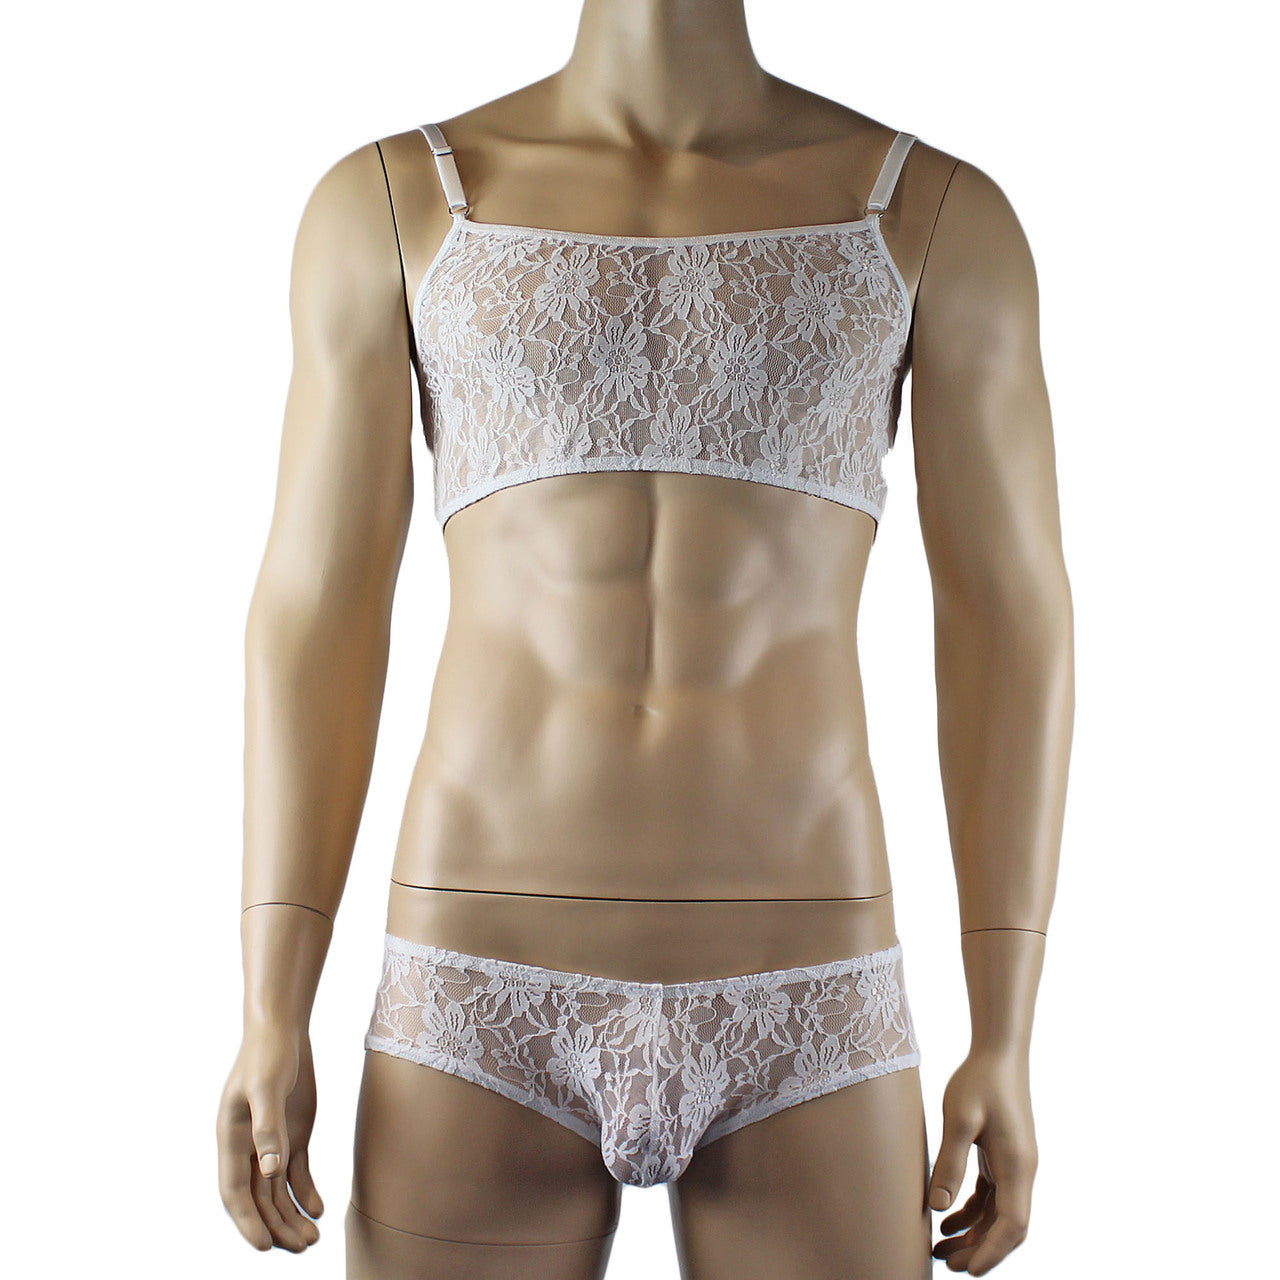 Mens Sexy Lace Crop Bra Top Camisole and Male Lingerie Panty Briefs White